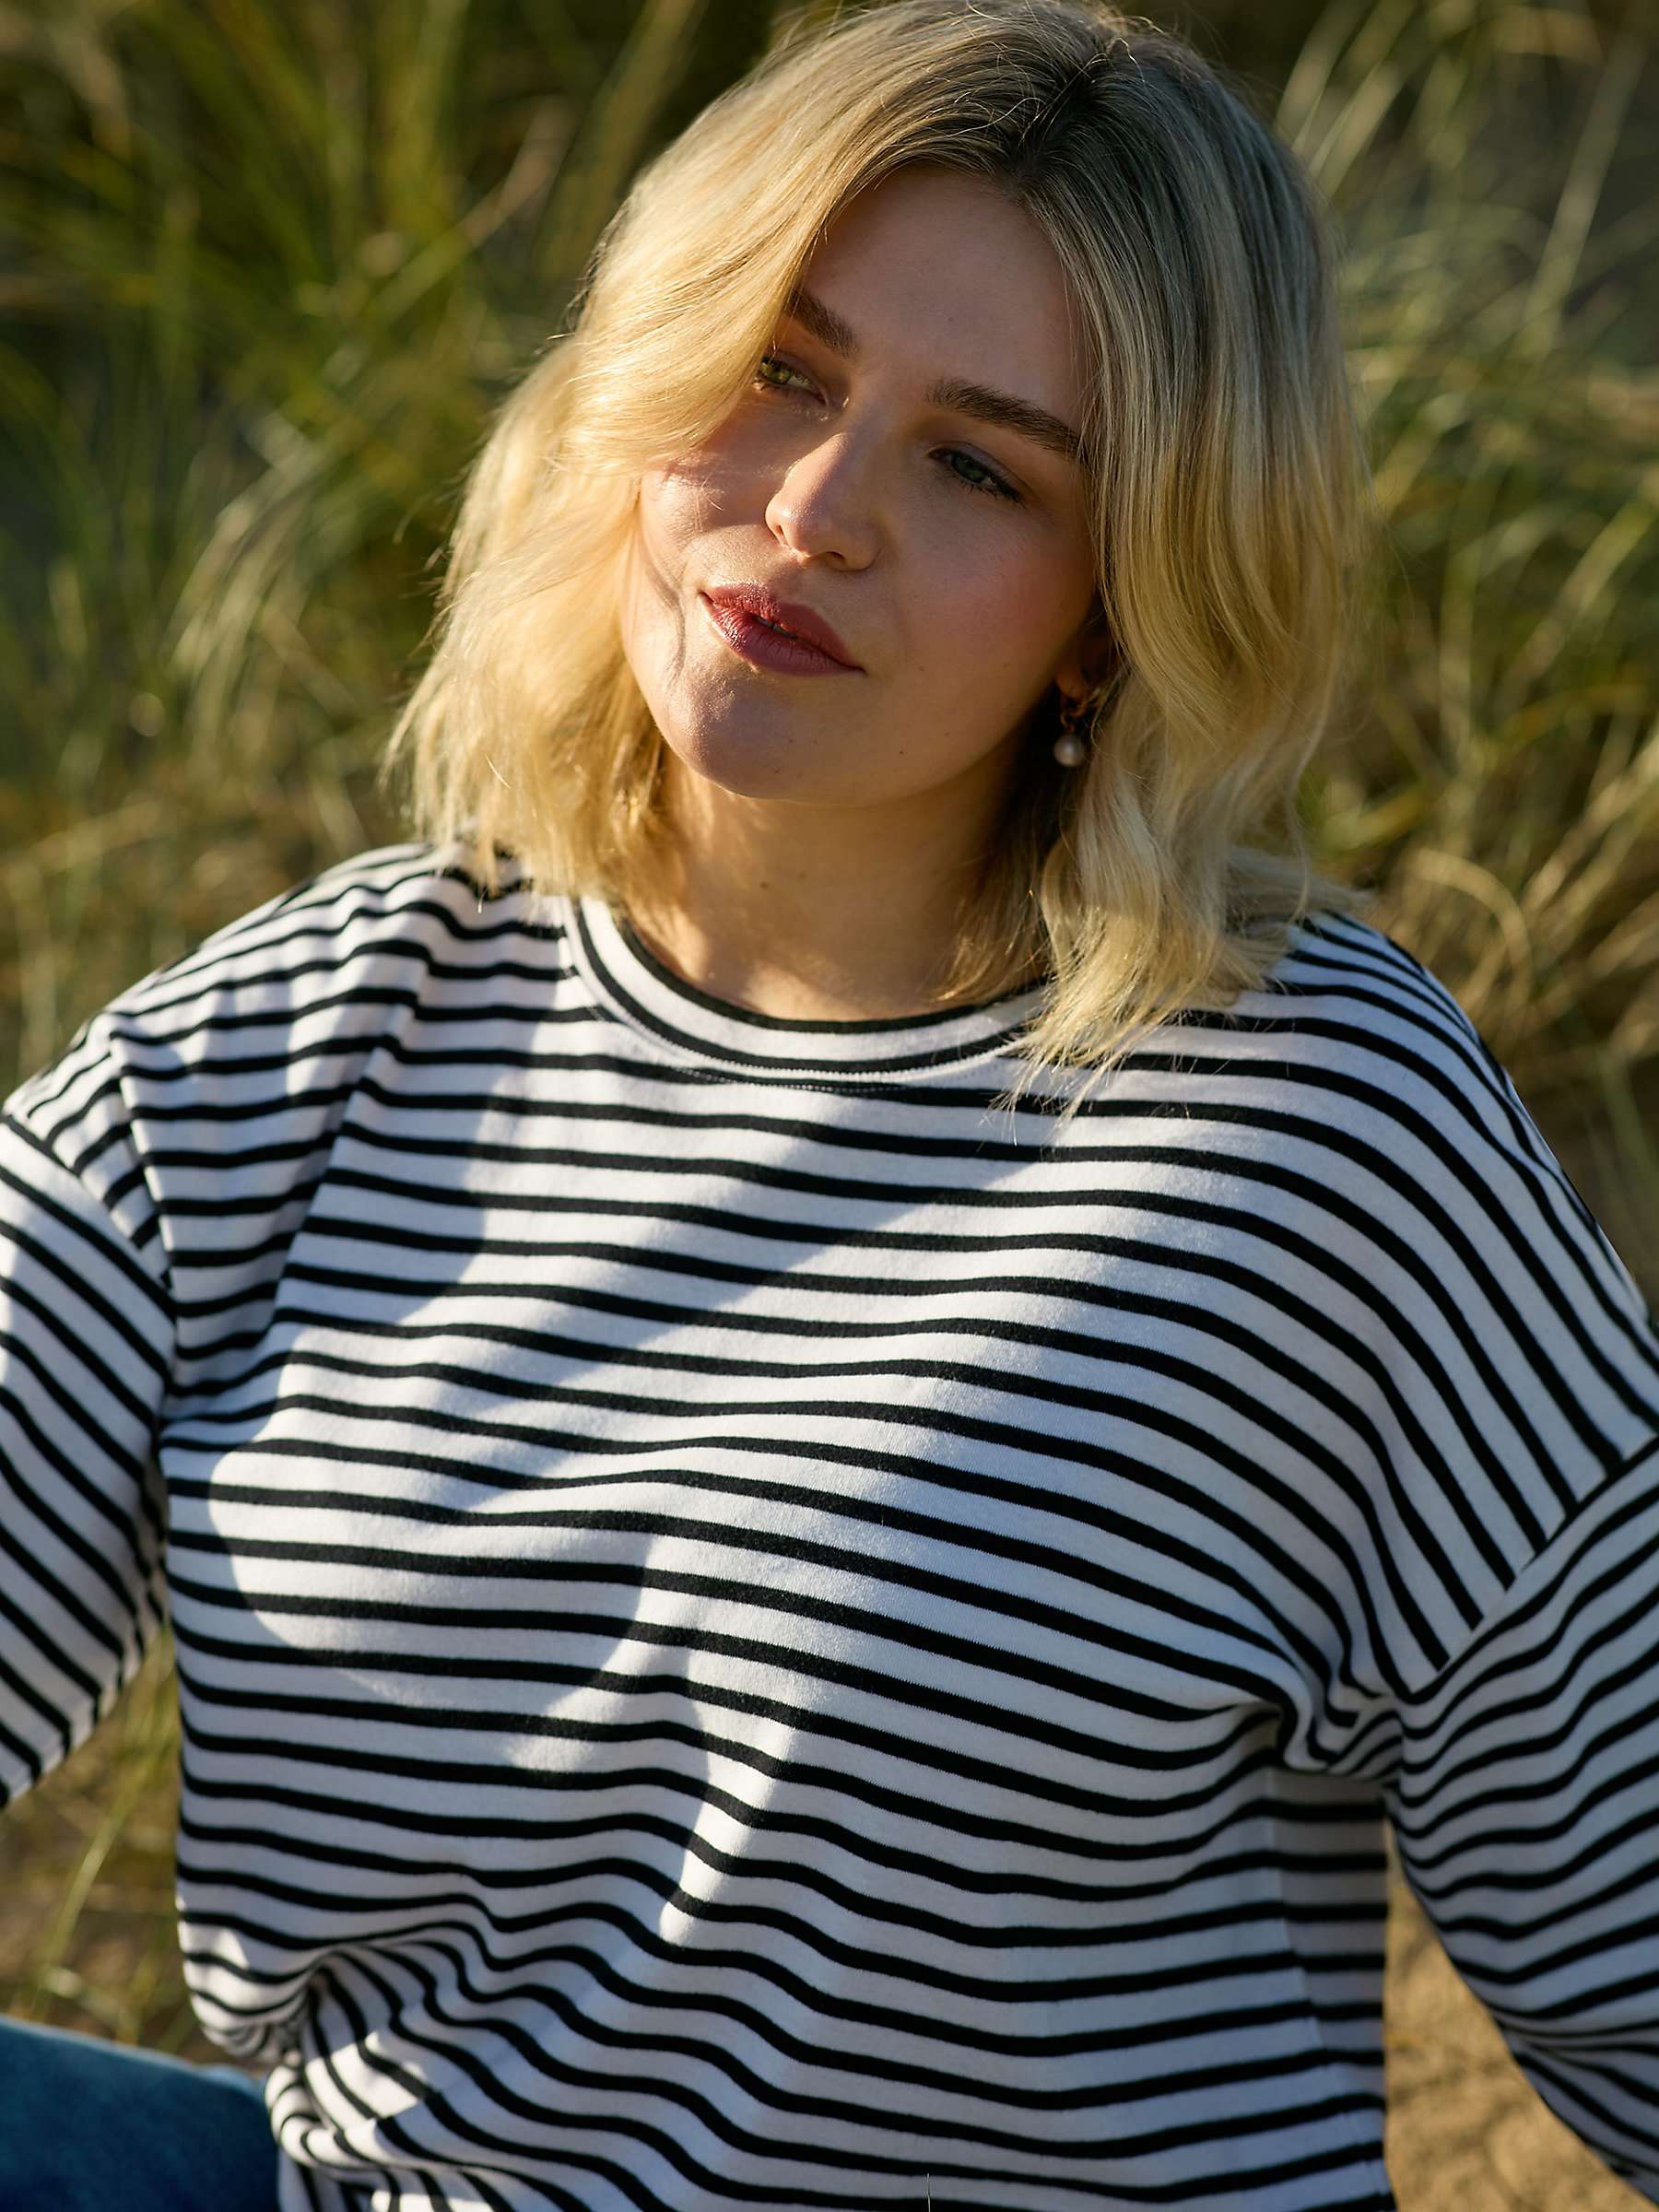 Buy Live Unlimited Curve Stripe Jersey Relaxed Top, Blue/White Online at johnlewis.com